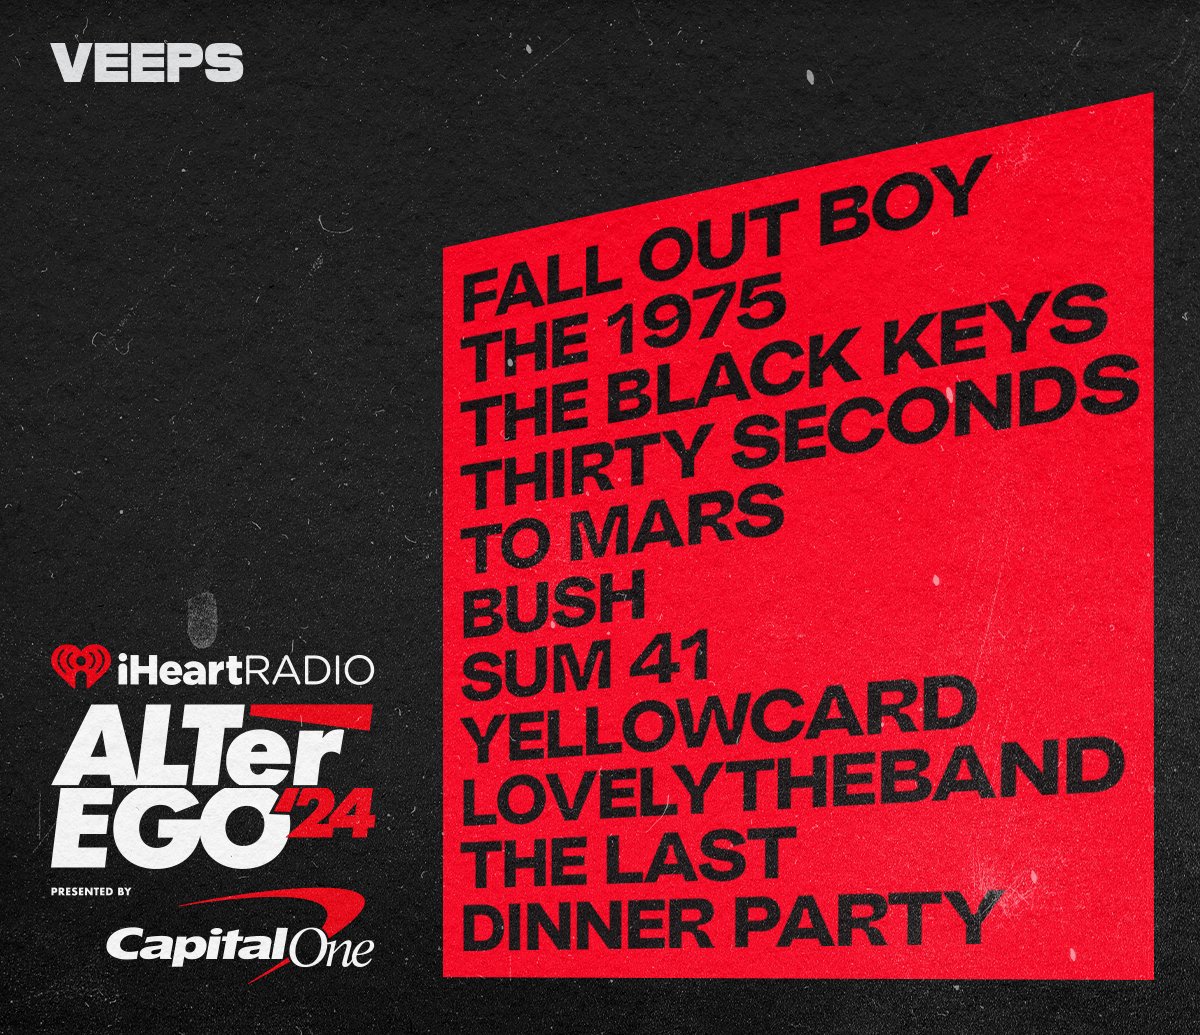 Don't miss the chance to watch the SOLD OUT iHeart ALTer EGO Music Festival tomorrow night at 9pm. With @Veeps  All Access, you'll get front-row seats to electrifying performances by Fall Out Boy, The 1975, The Black Keys, Sum41, Yellowcard, and more. #iHeartALT <3